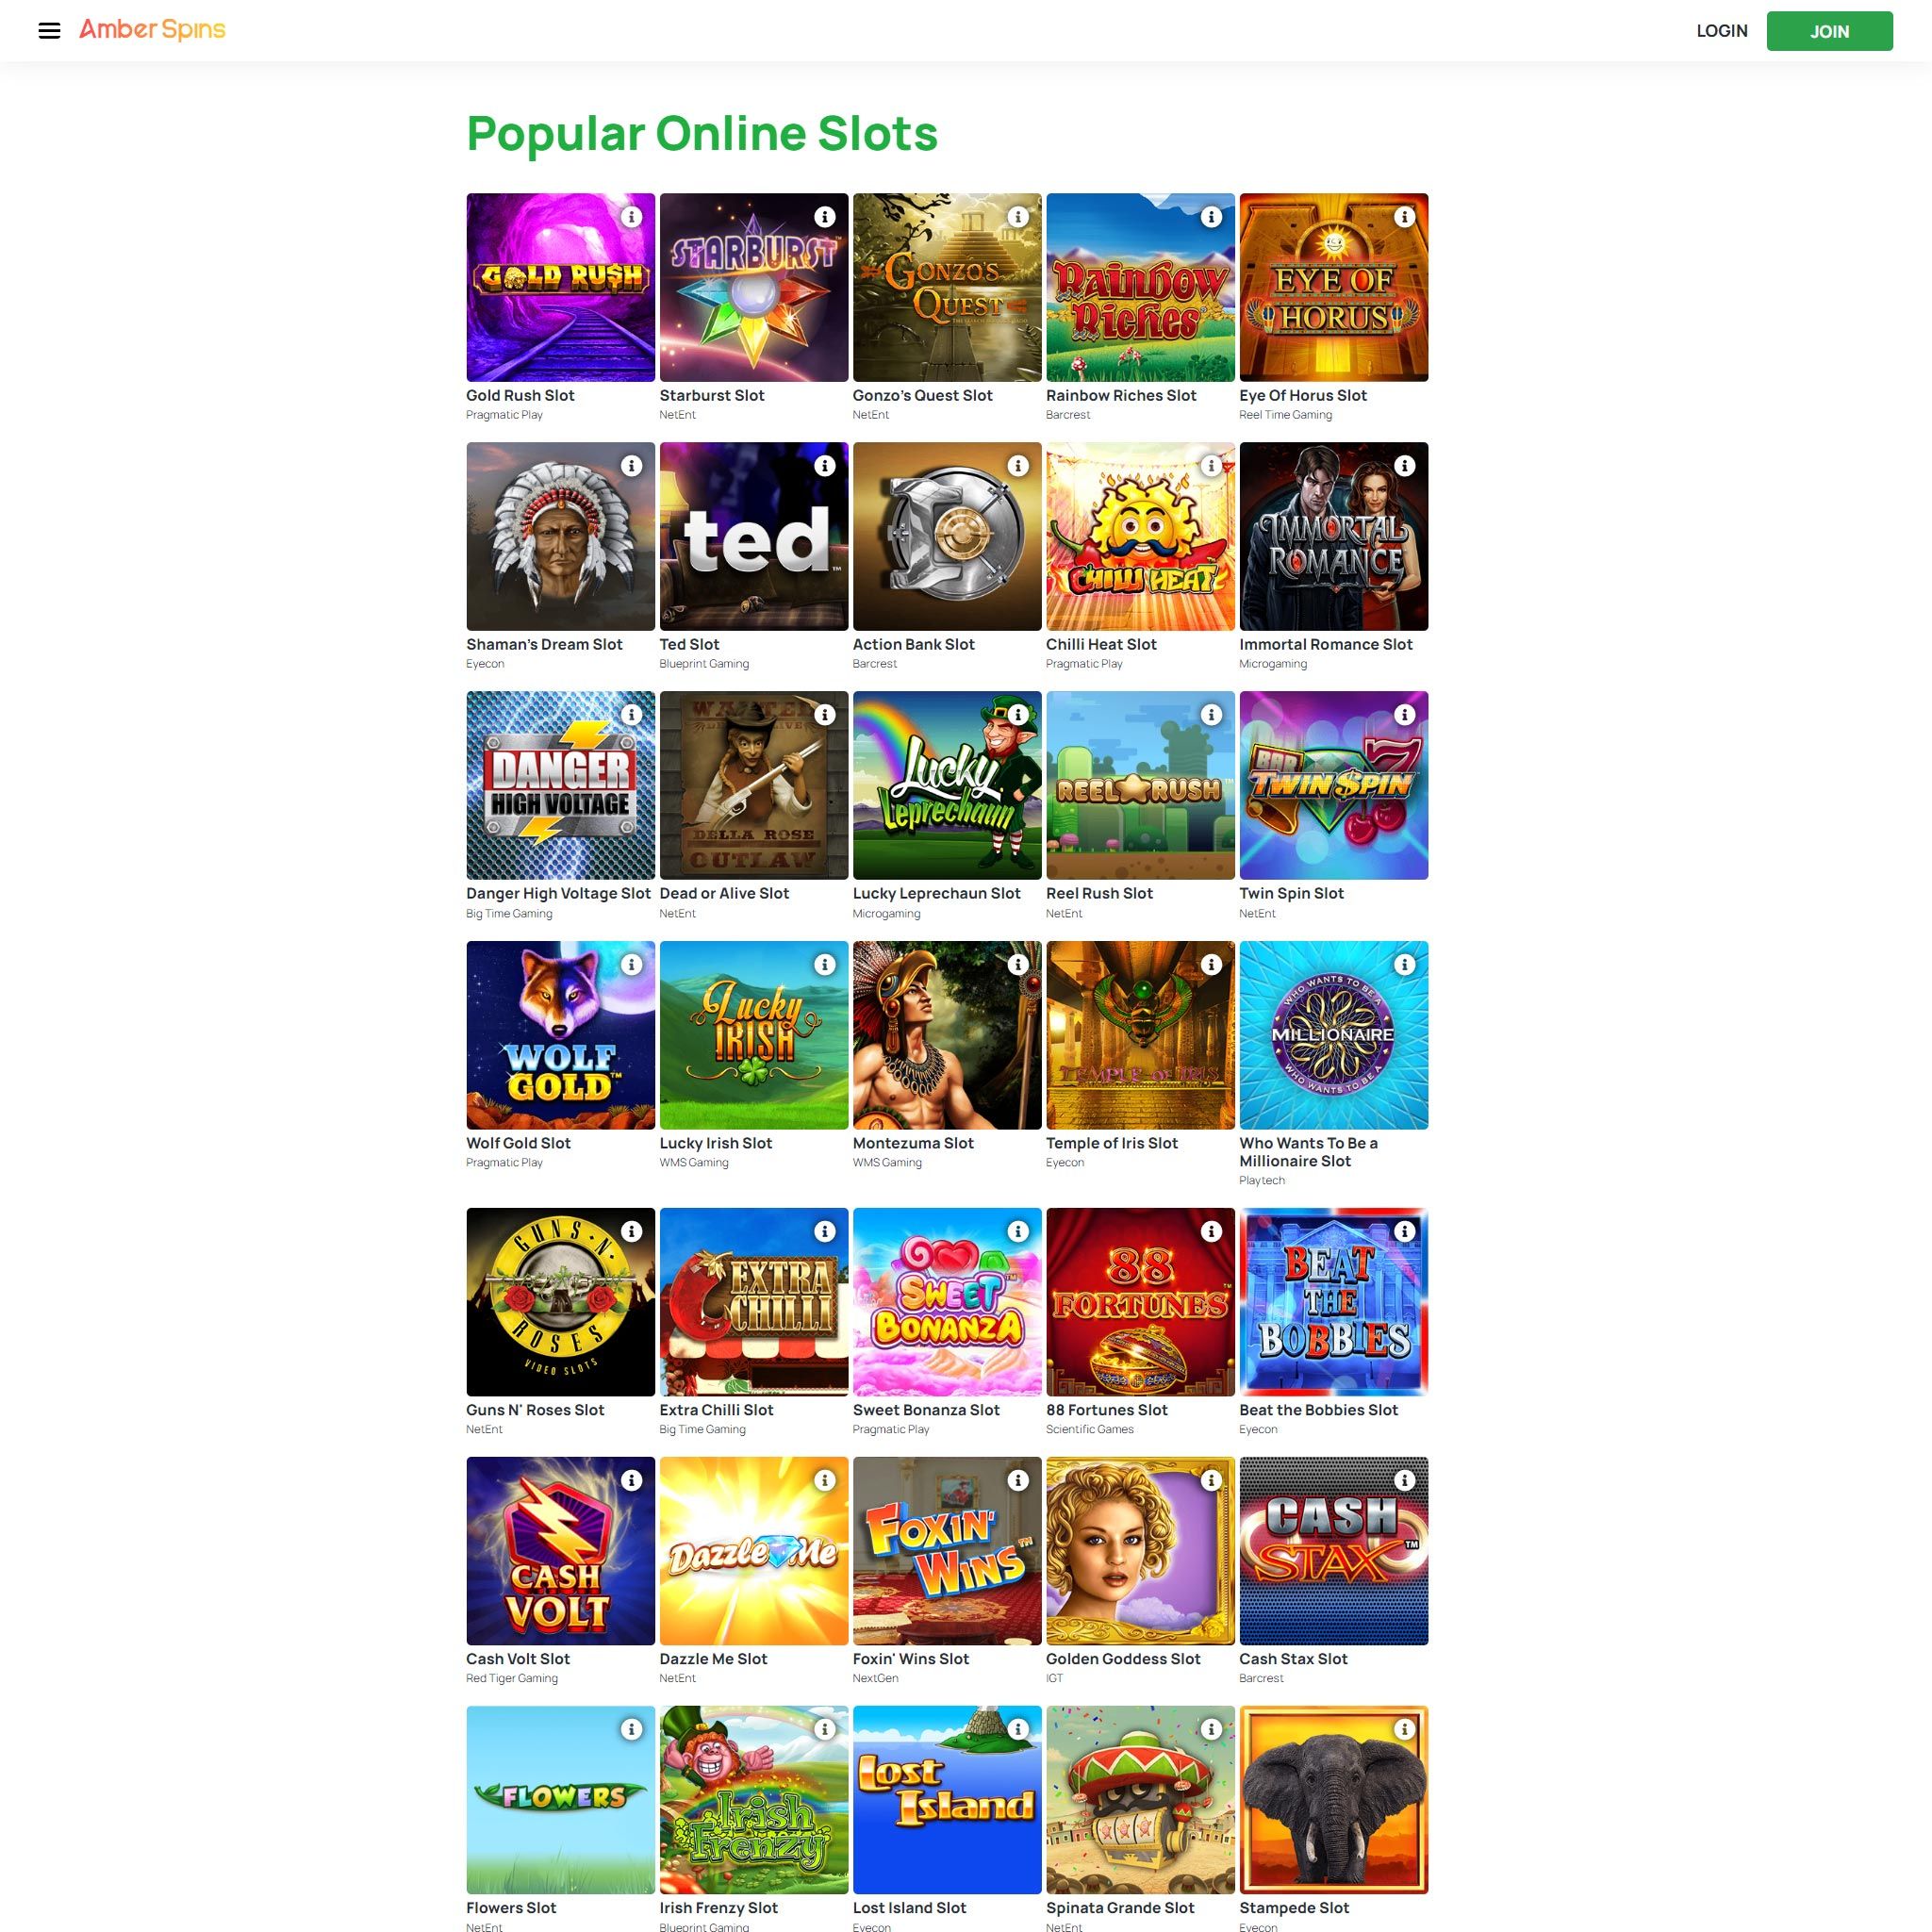 Find Amber Spins Casino game catalog